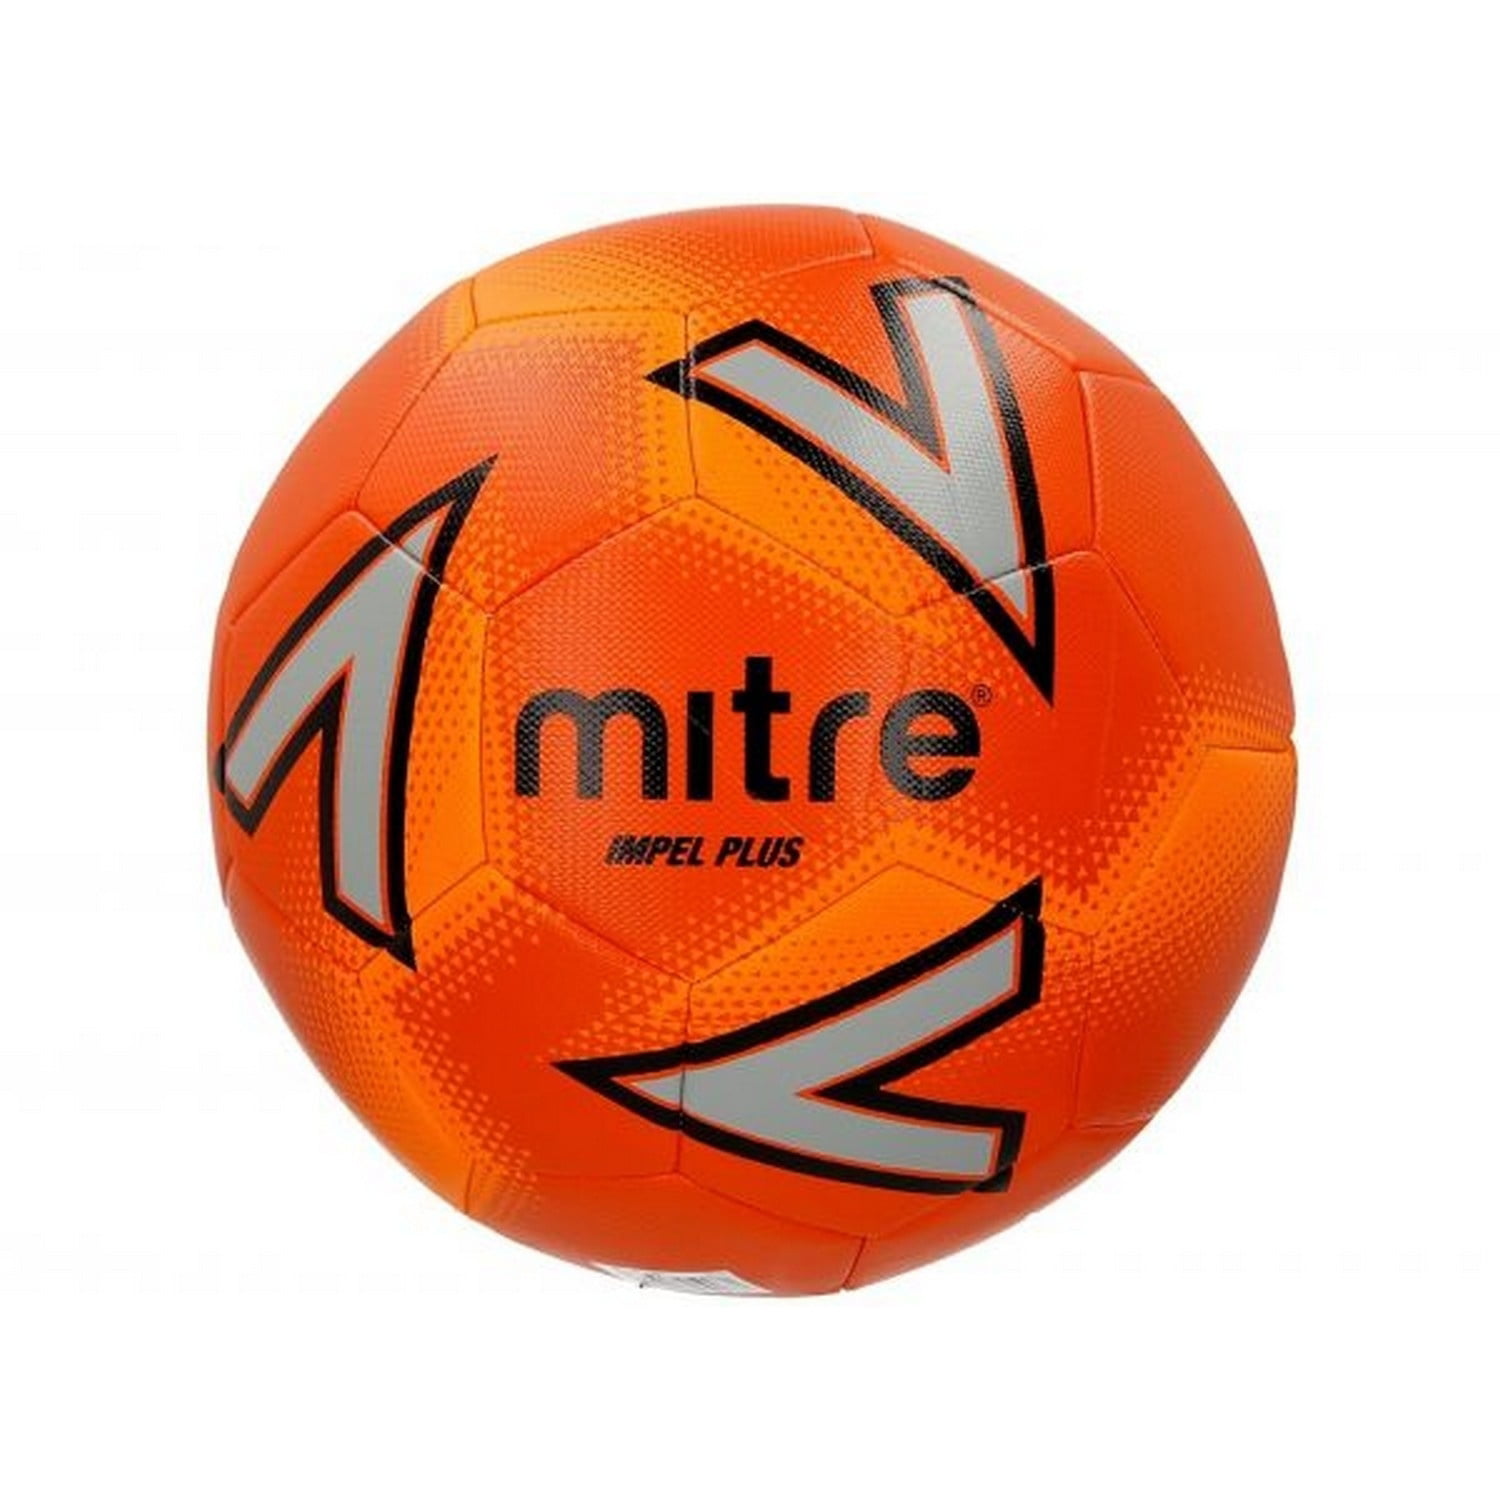 Mitre Impel Club Football Pack Size 3 4 or 5 